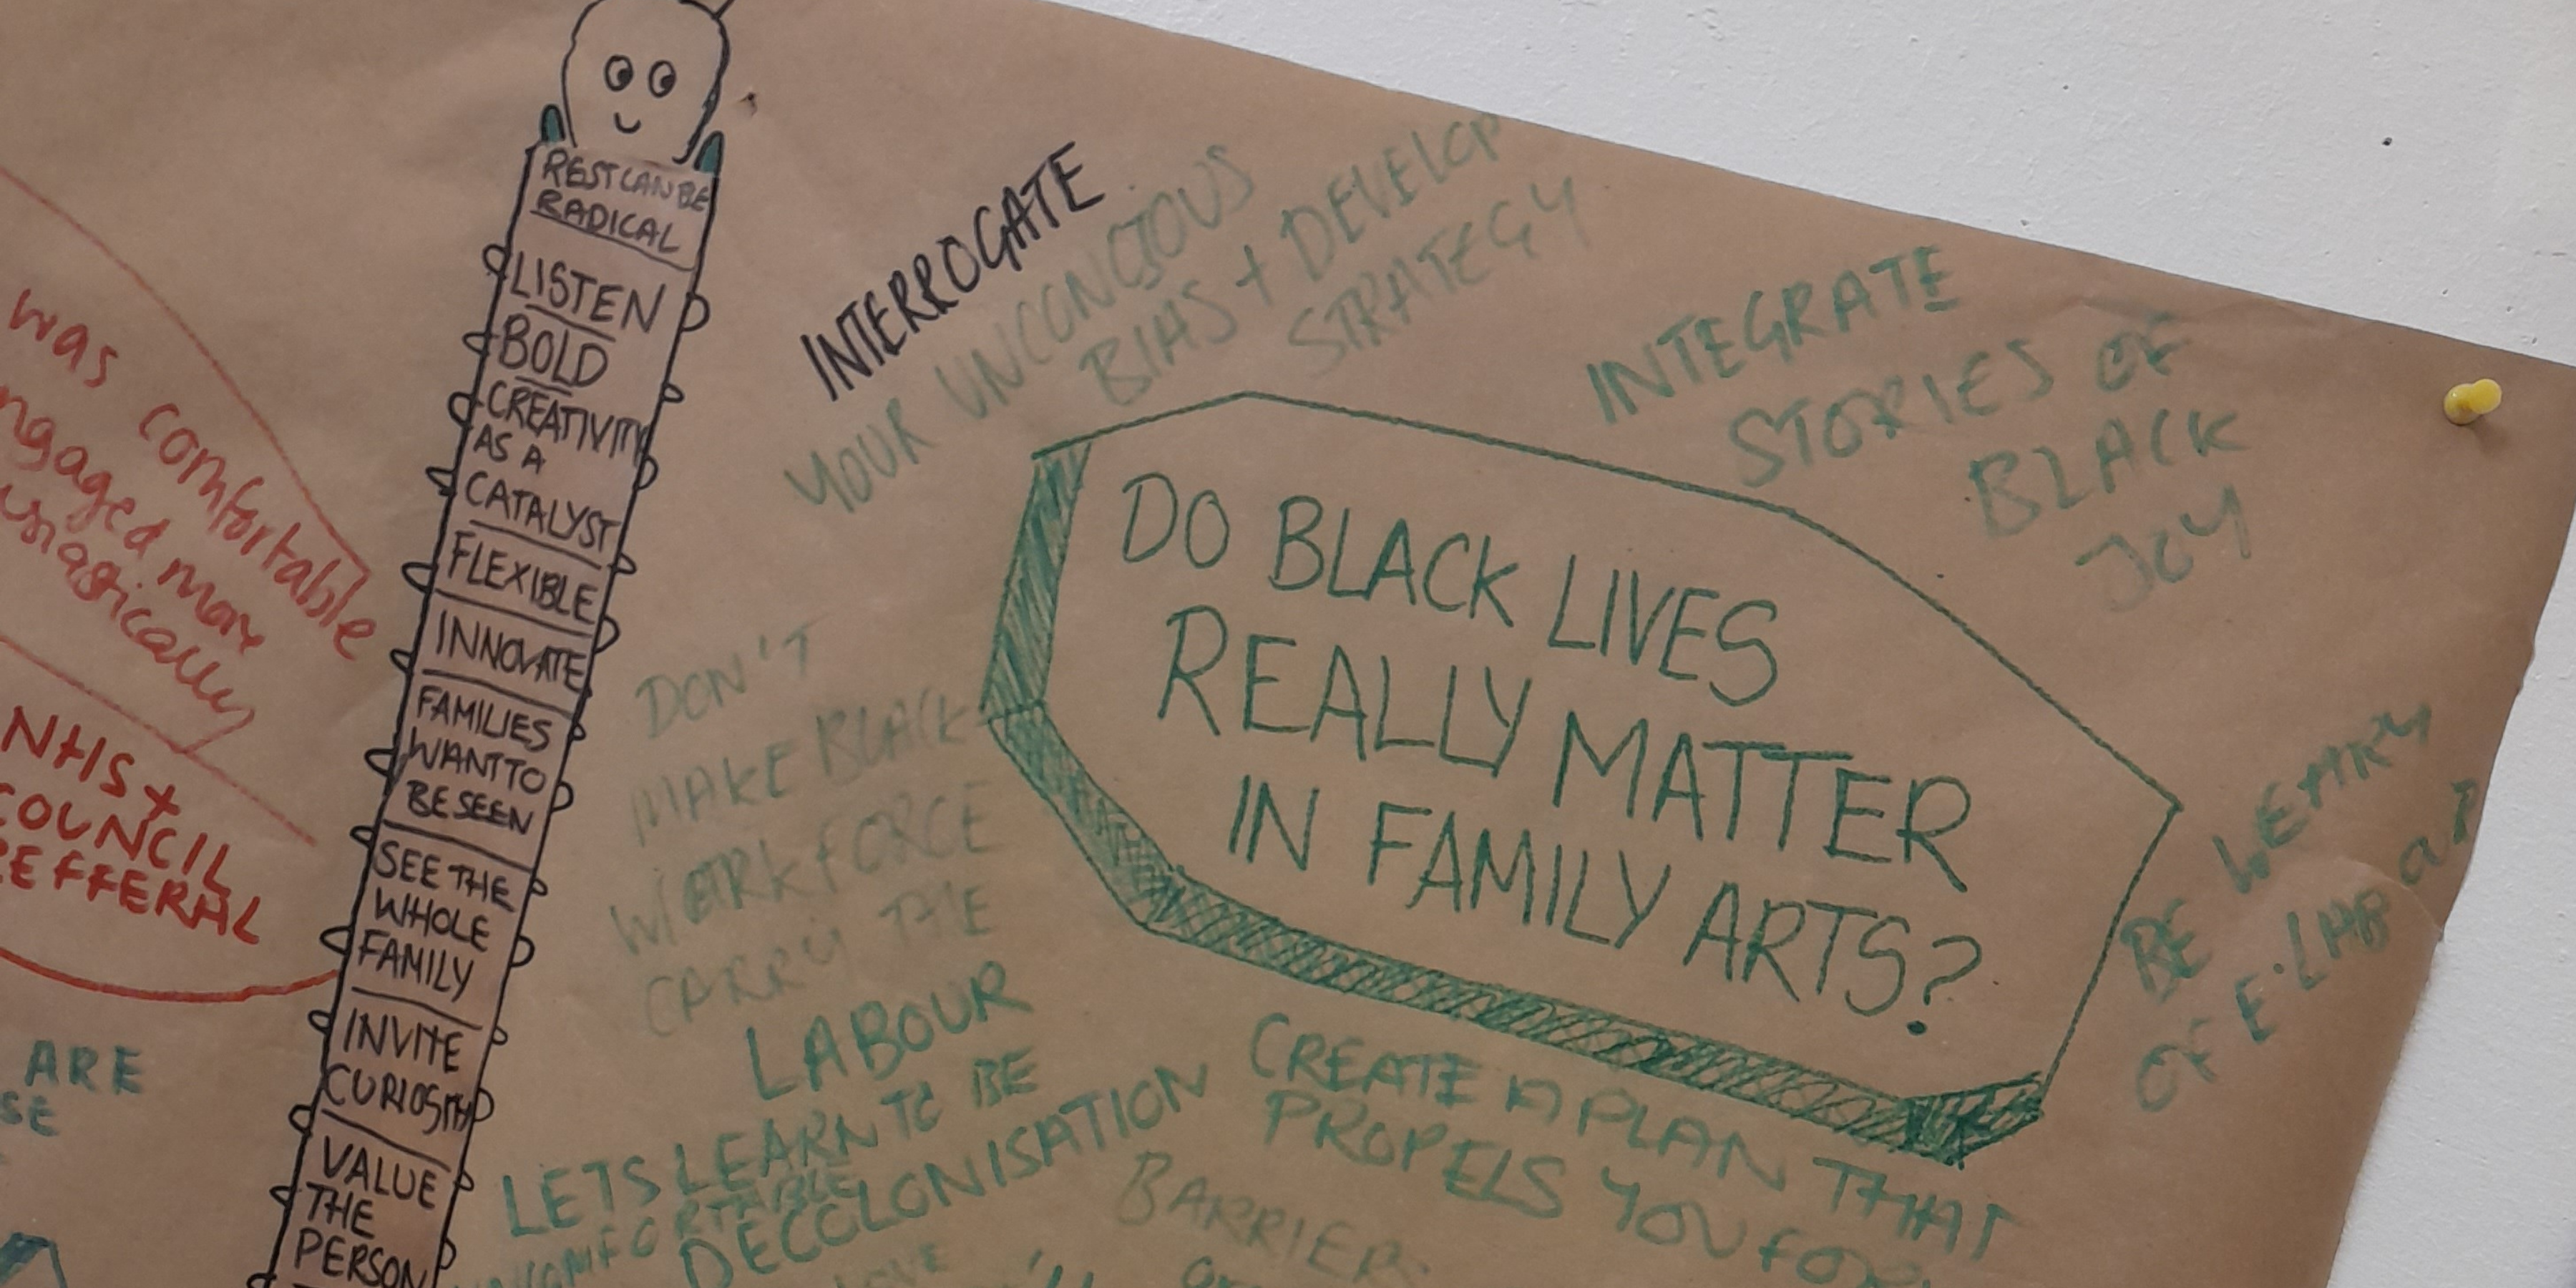 Inspiration board by Felicity Goodman, collecting considerations for the next steps for family arts organisations. This part focuses on Black Lives Matter.